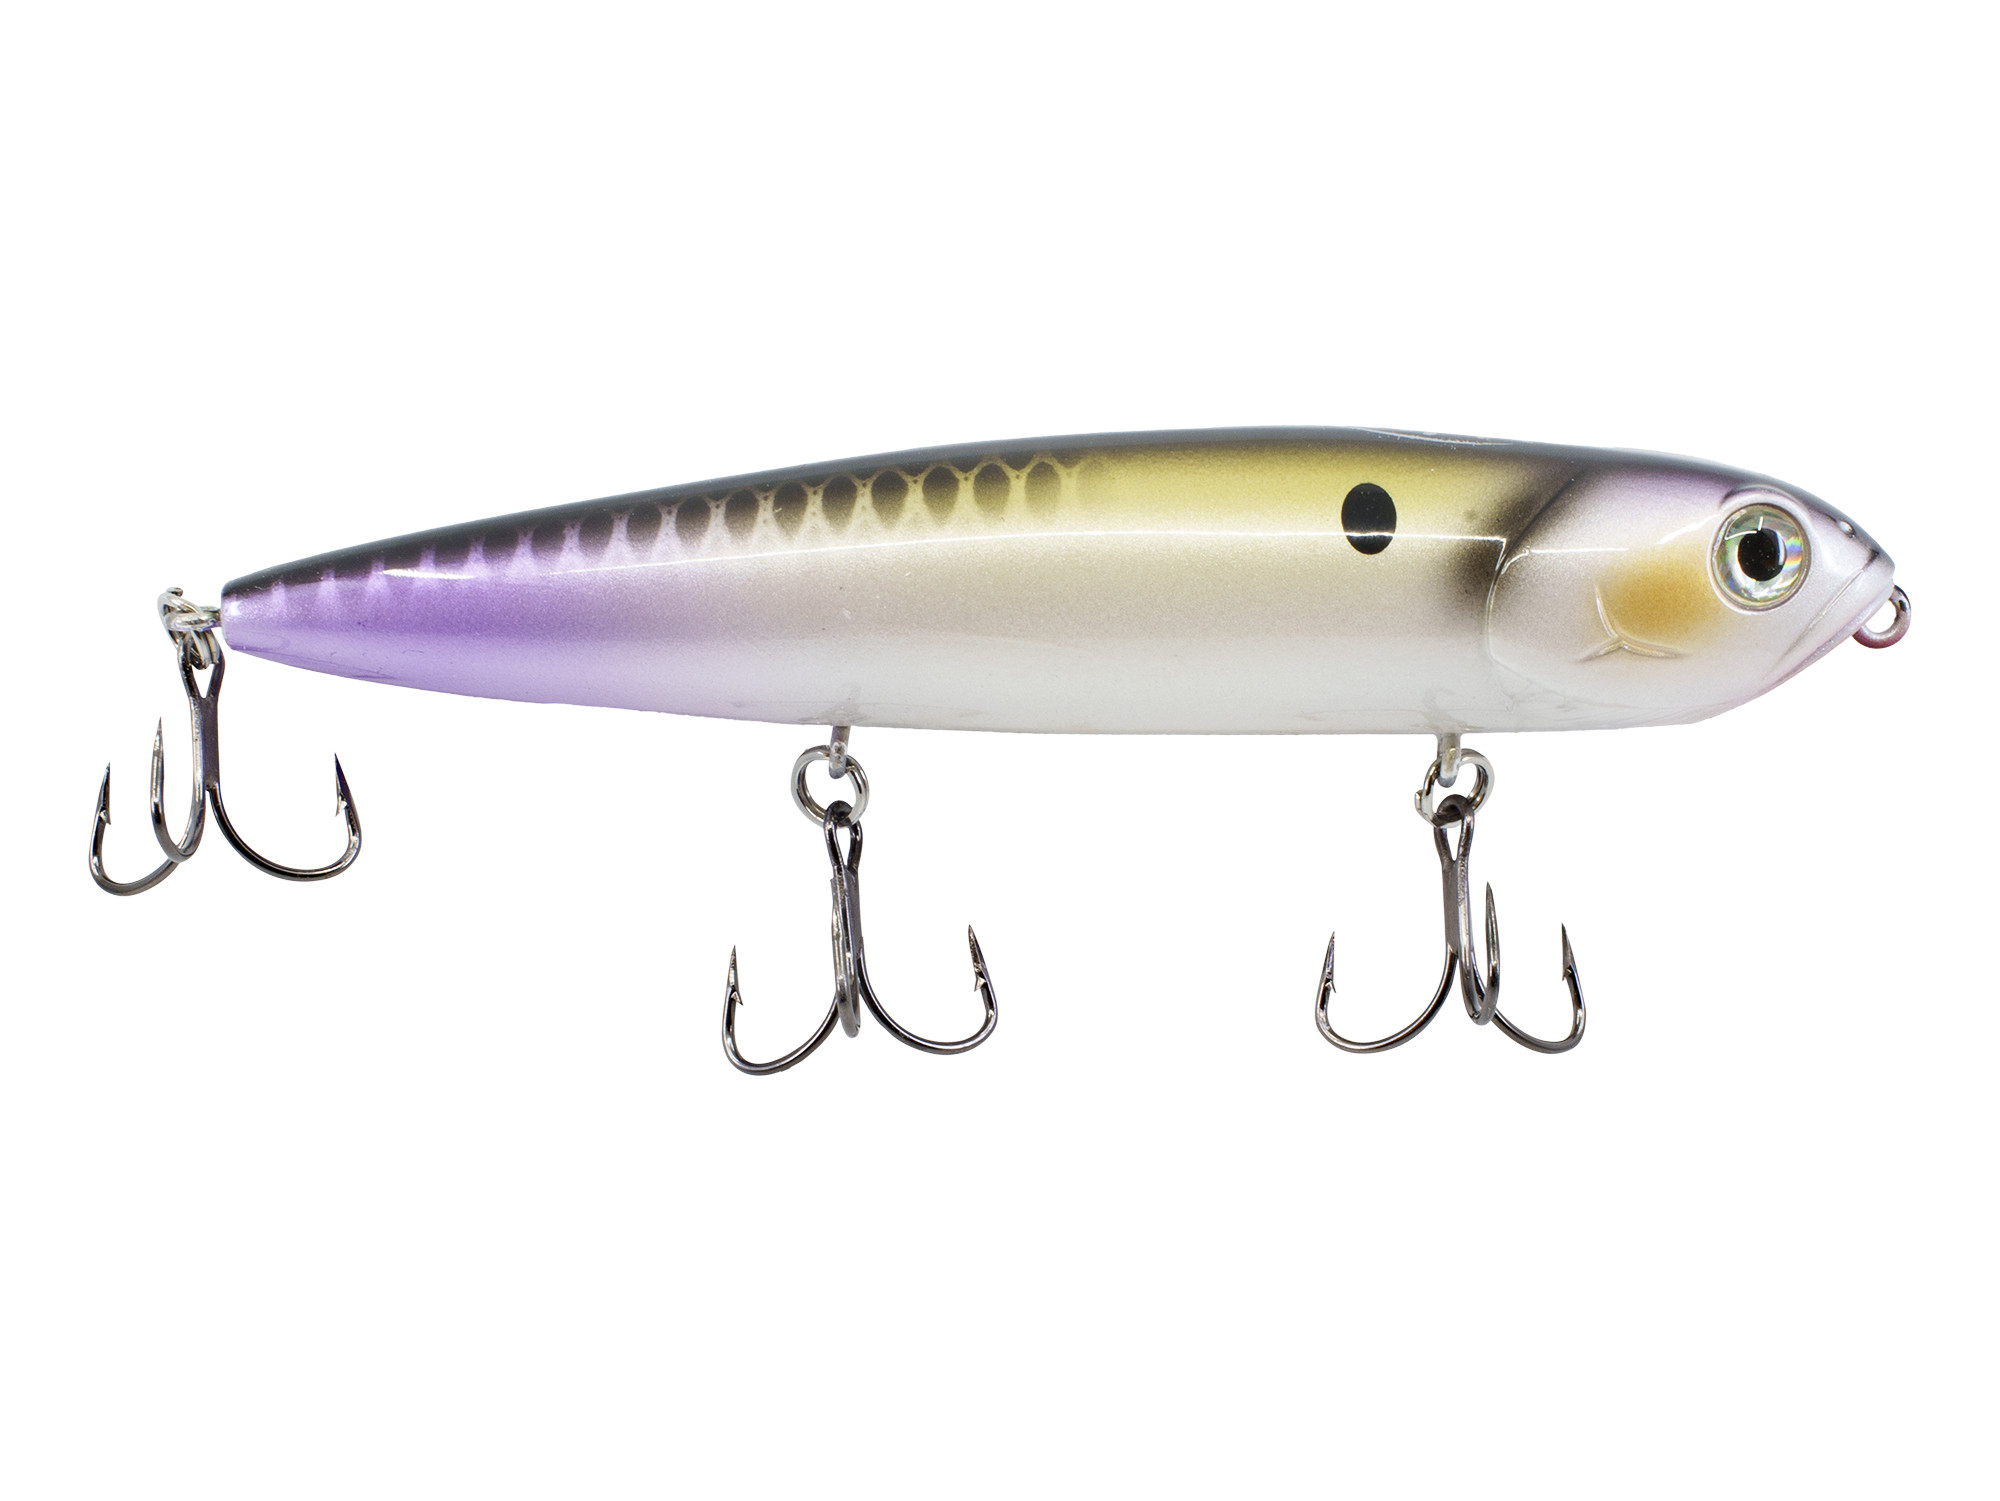 Limited editions – XCITE BAITS